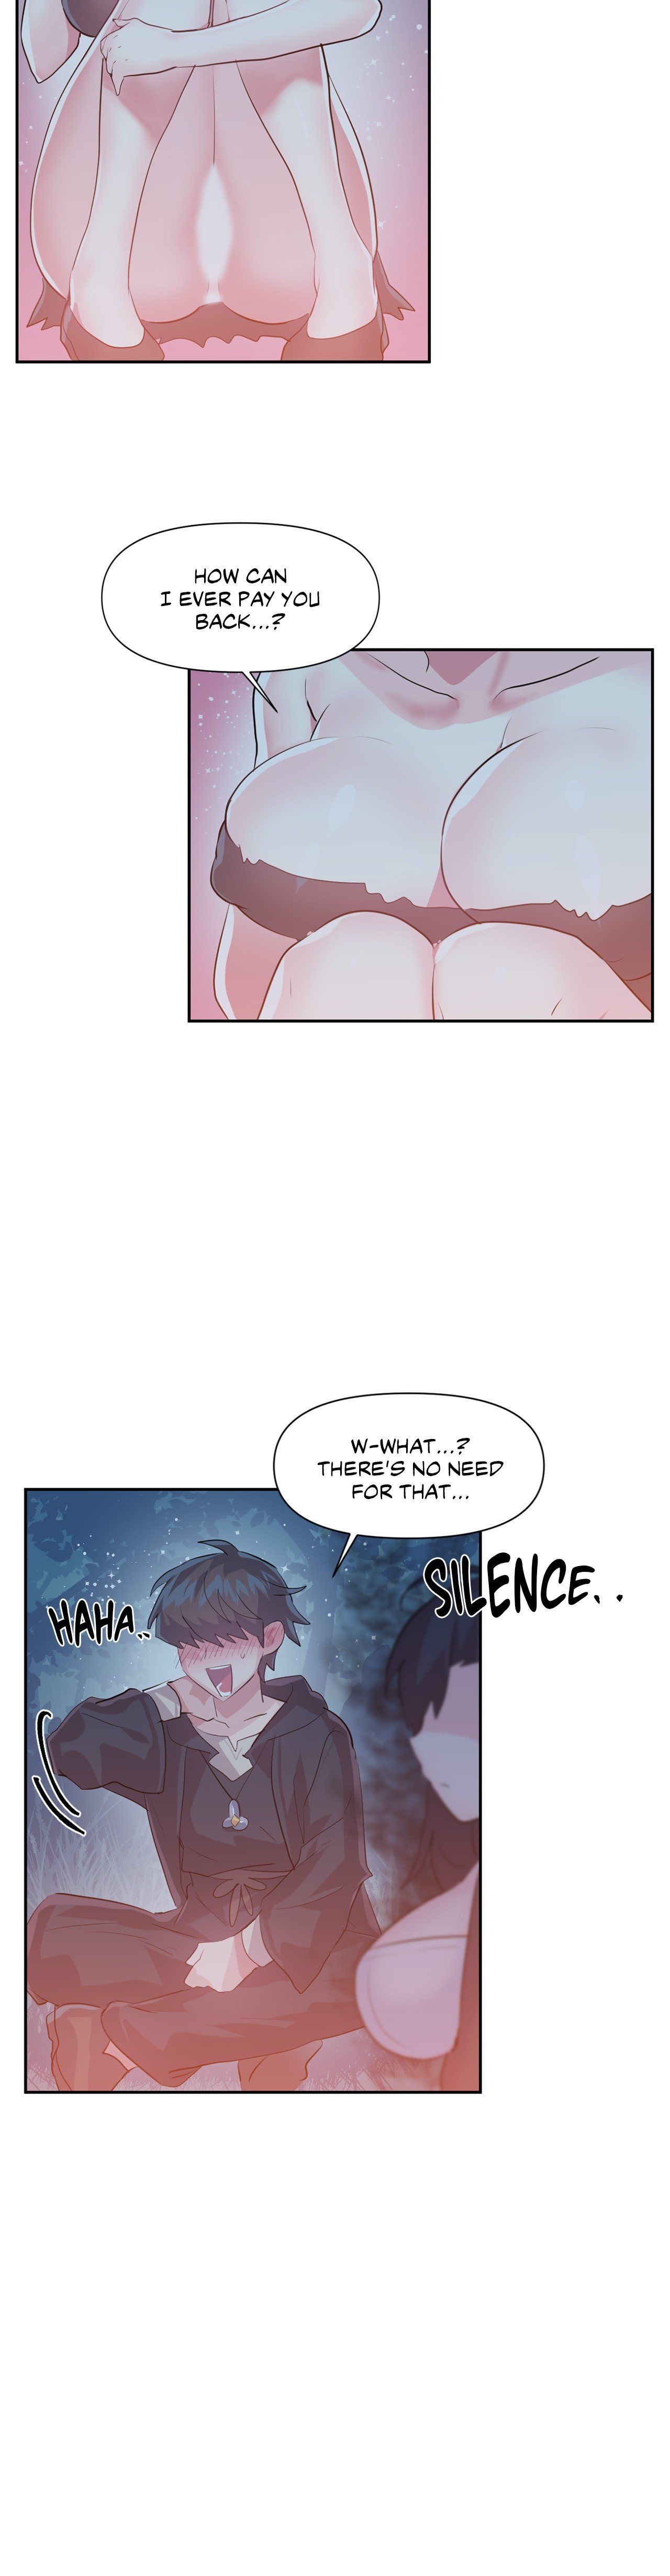 log-in-to-lust-a-land-chap-37-5